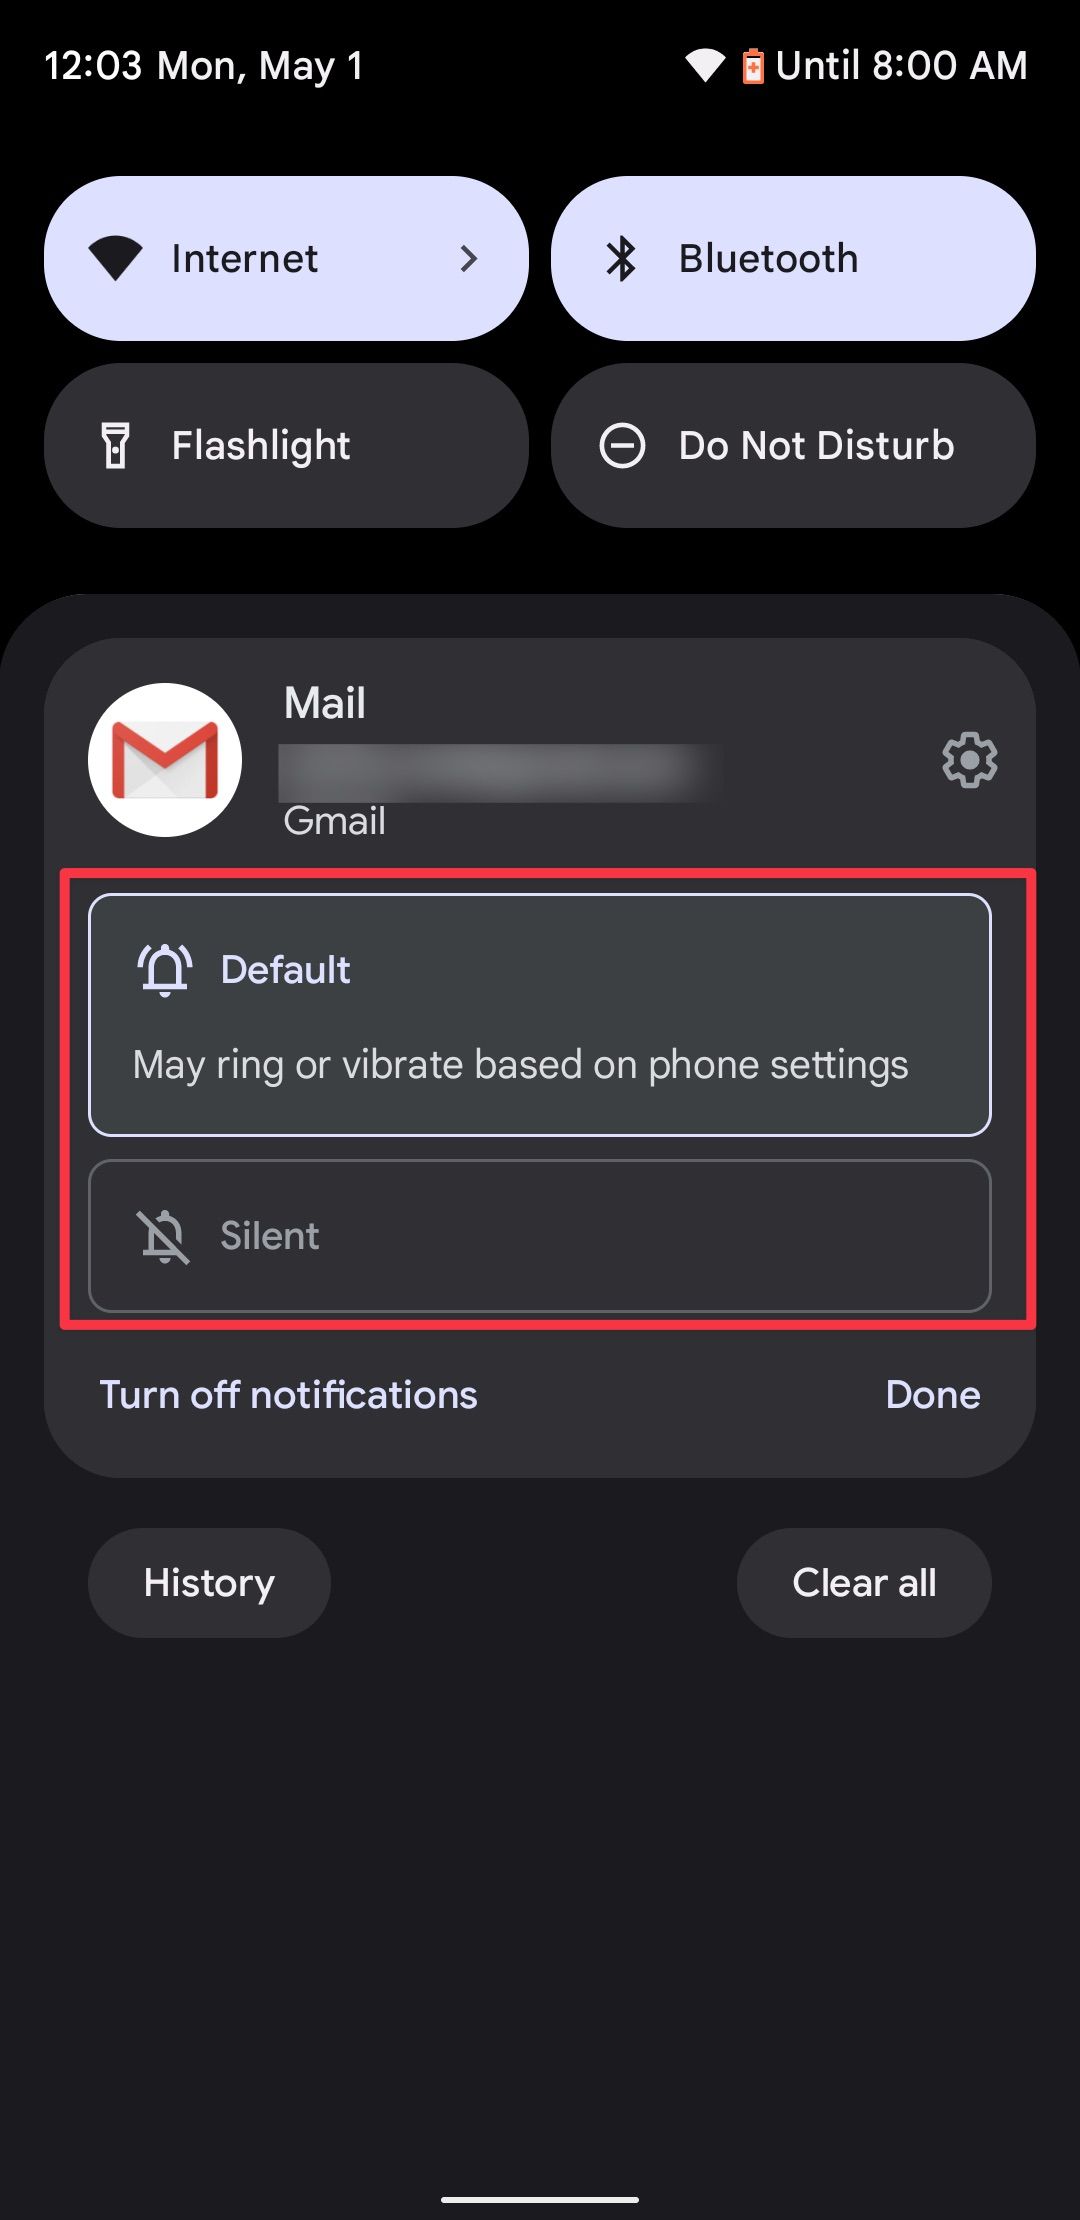 Silence or turn off notification